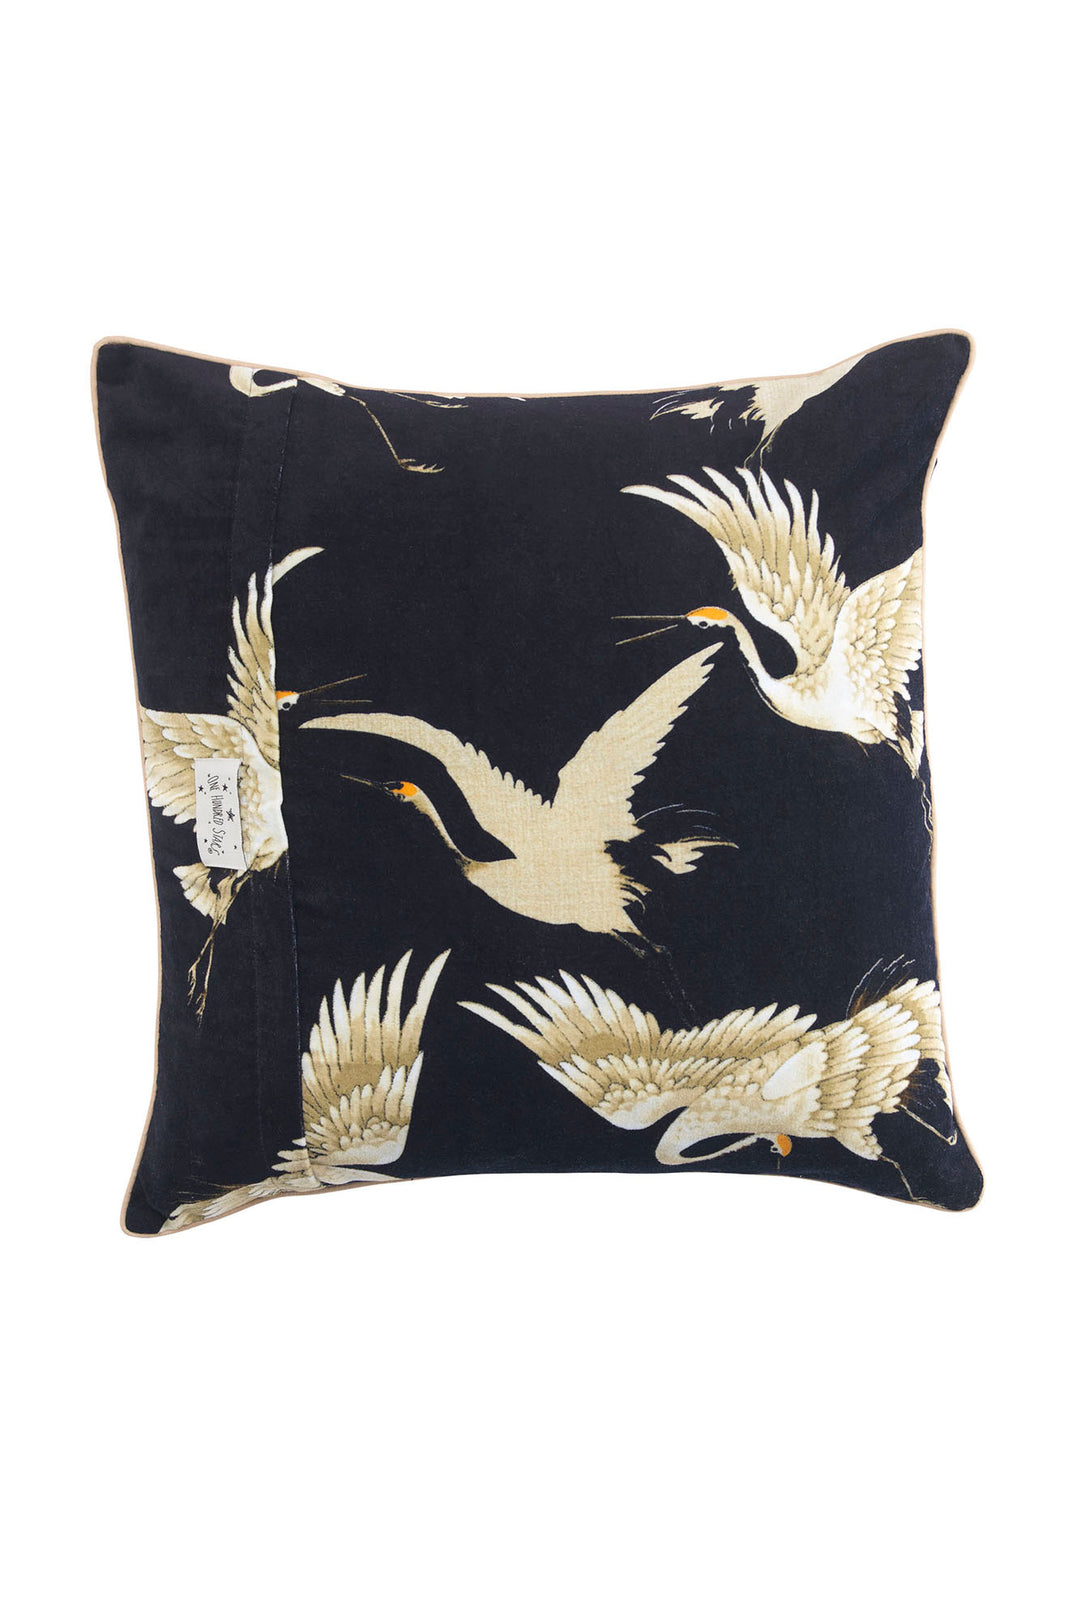 One Hundred Stars Stork Crane Black Cushion - Stork Black Square Velvet Cushion is perfect for anyone looking for something chic, stylish and in vogue!